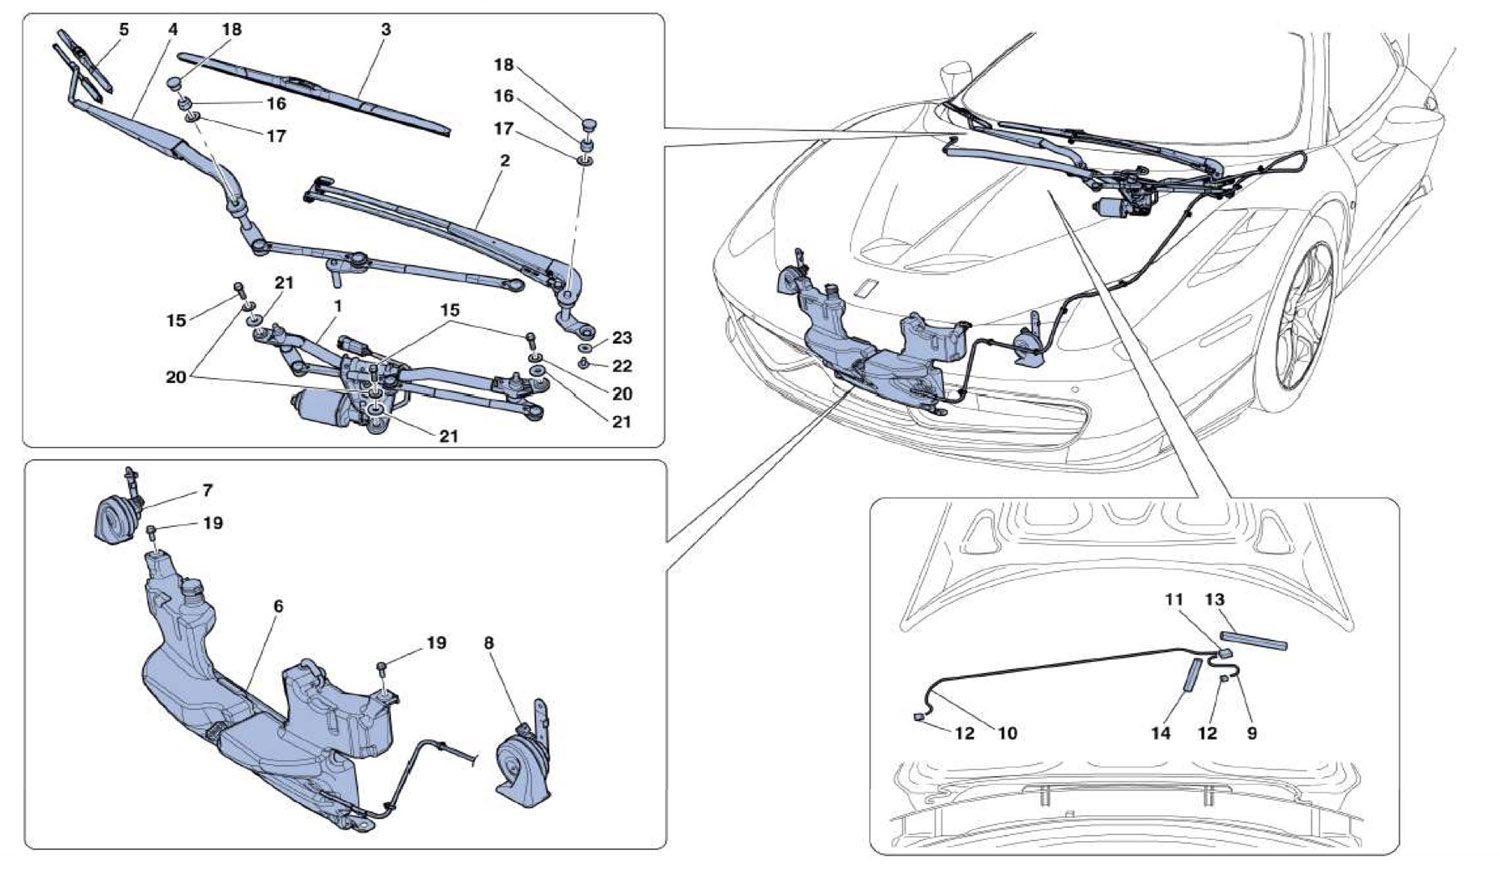 Schematic: Windshield - Wipers And Horns